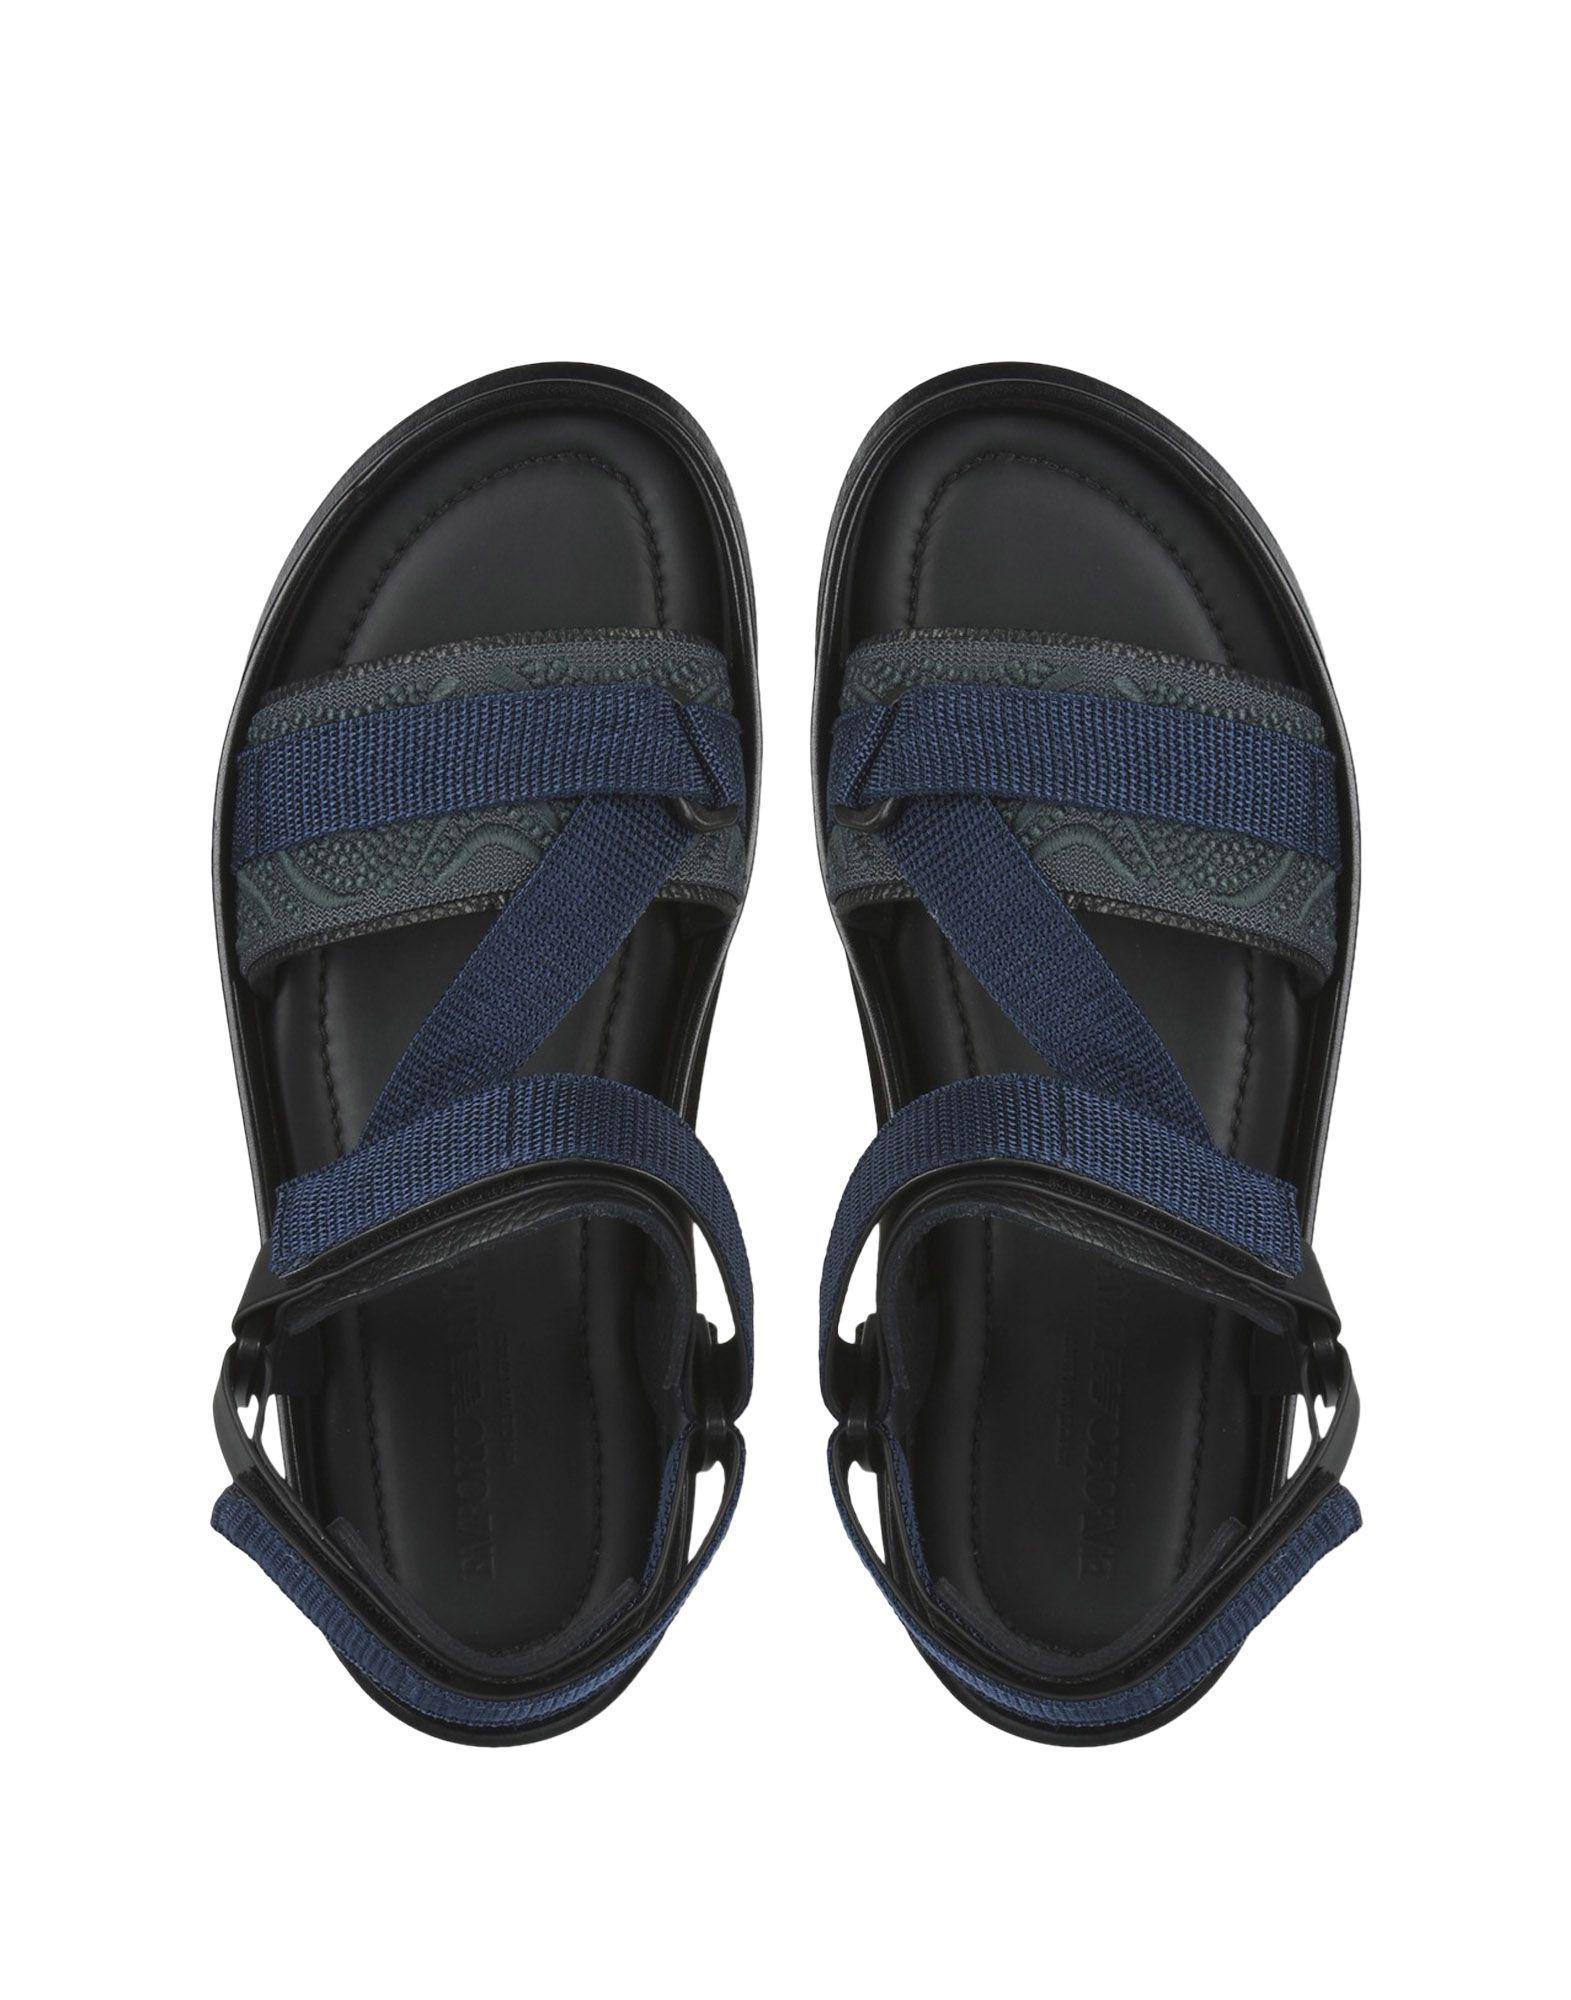 Emporio Armani Leather Sandals in Blue for Men - Lyst